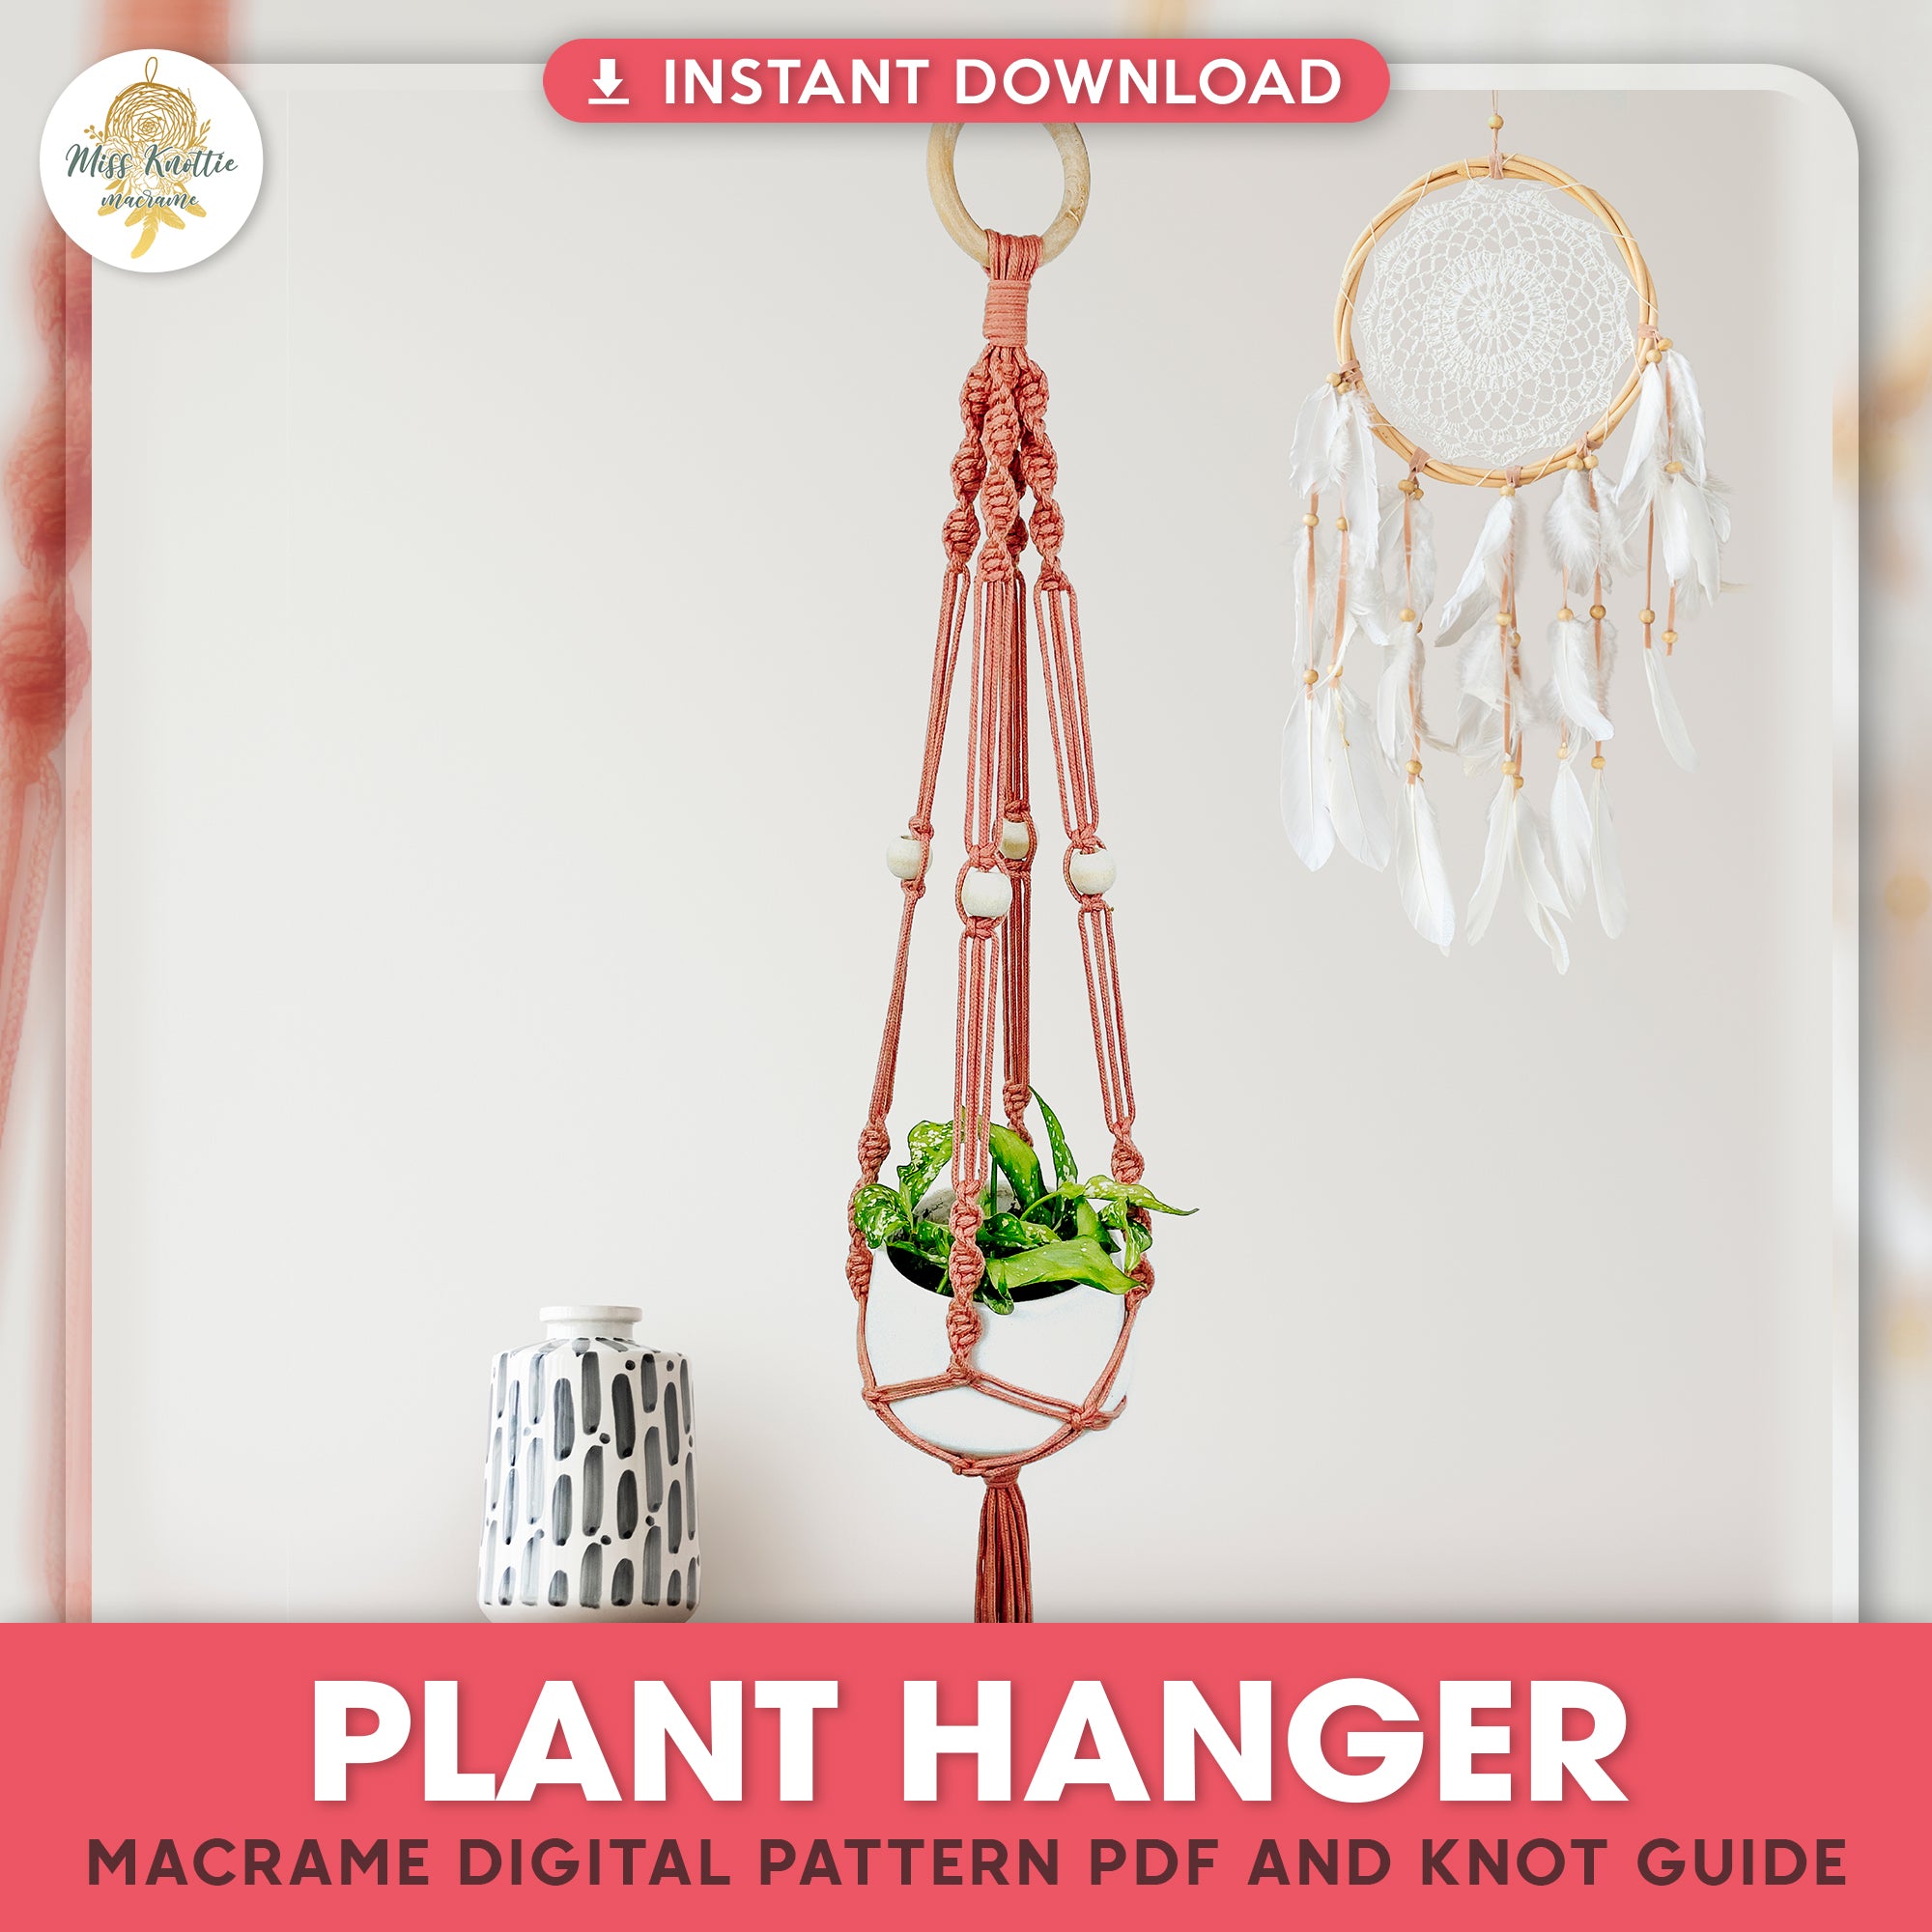 Plant Hanger - Digital PDF and Knot Guide